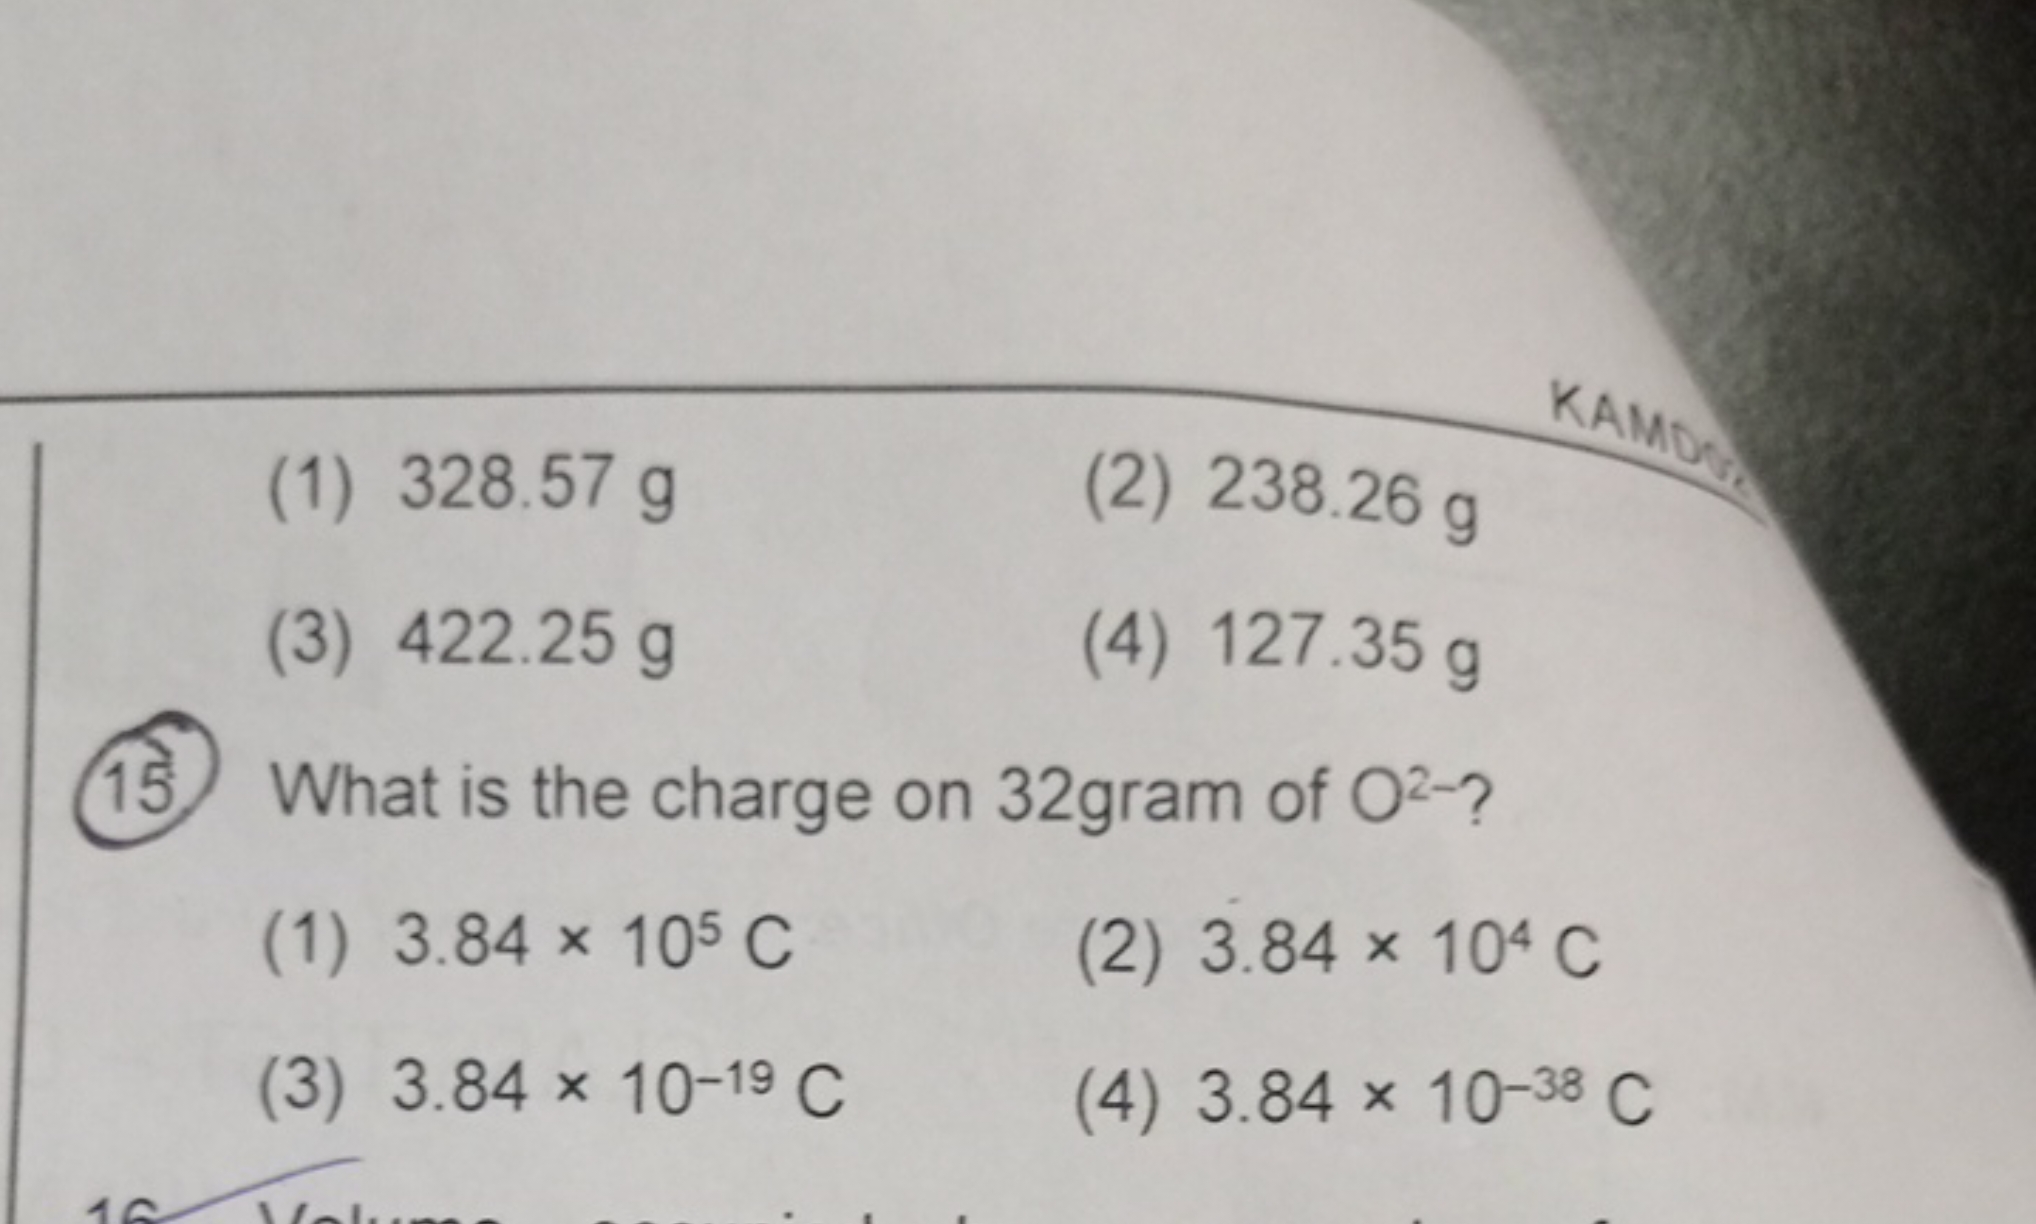 (15. What is the charge on 32gram of O2− ? 